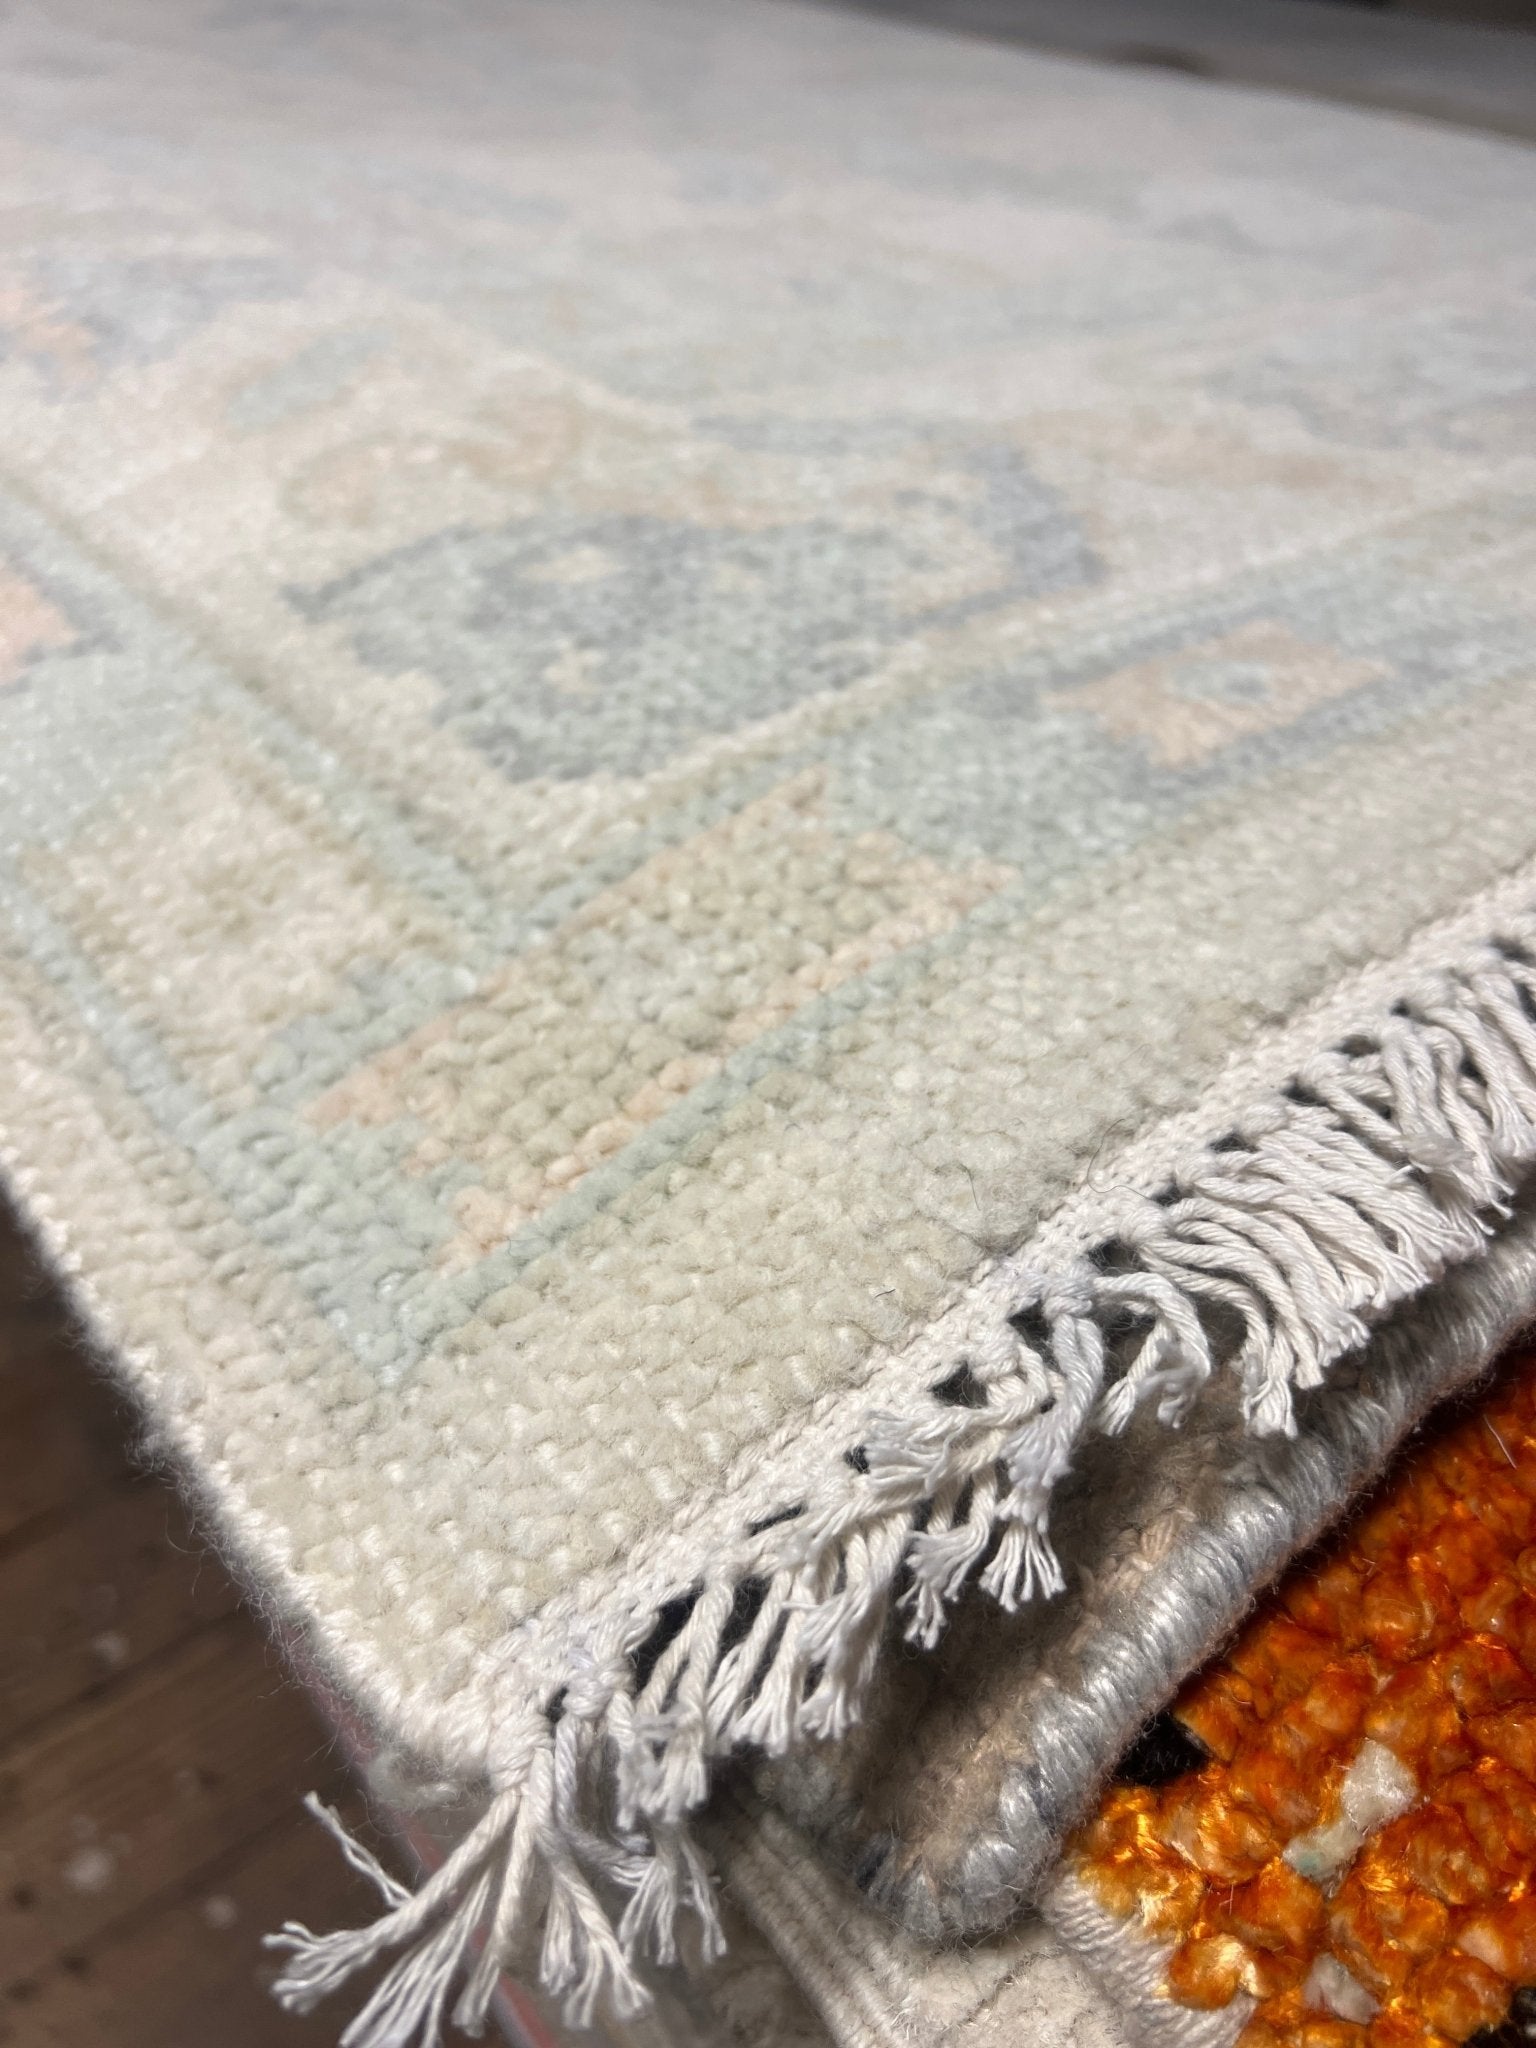 Anna 3.0x6.4 Hand-Knotted Cream and Gray Oushak | Banana Manor Rug Factory Outlet